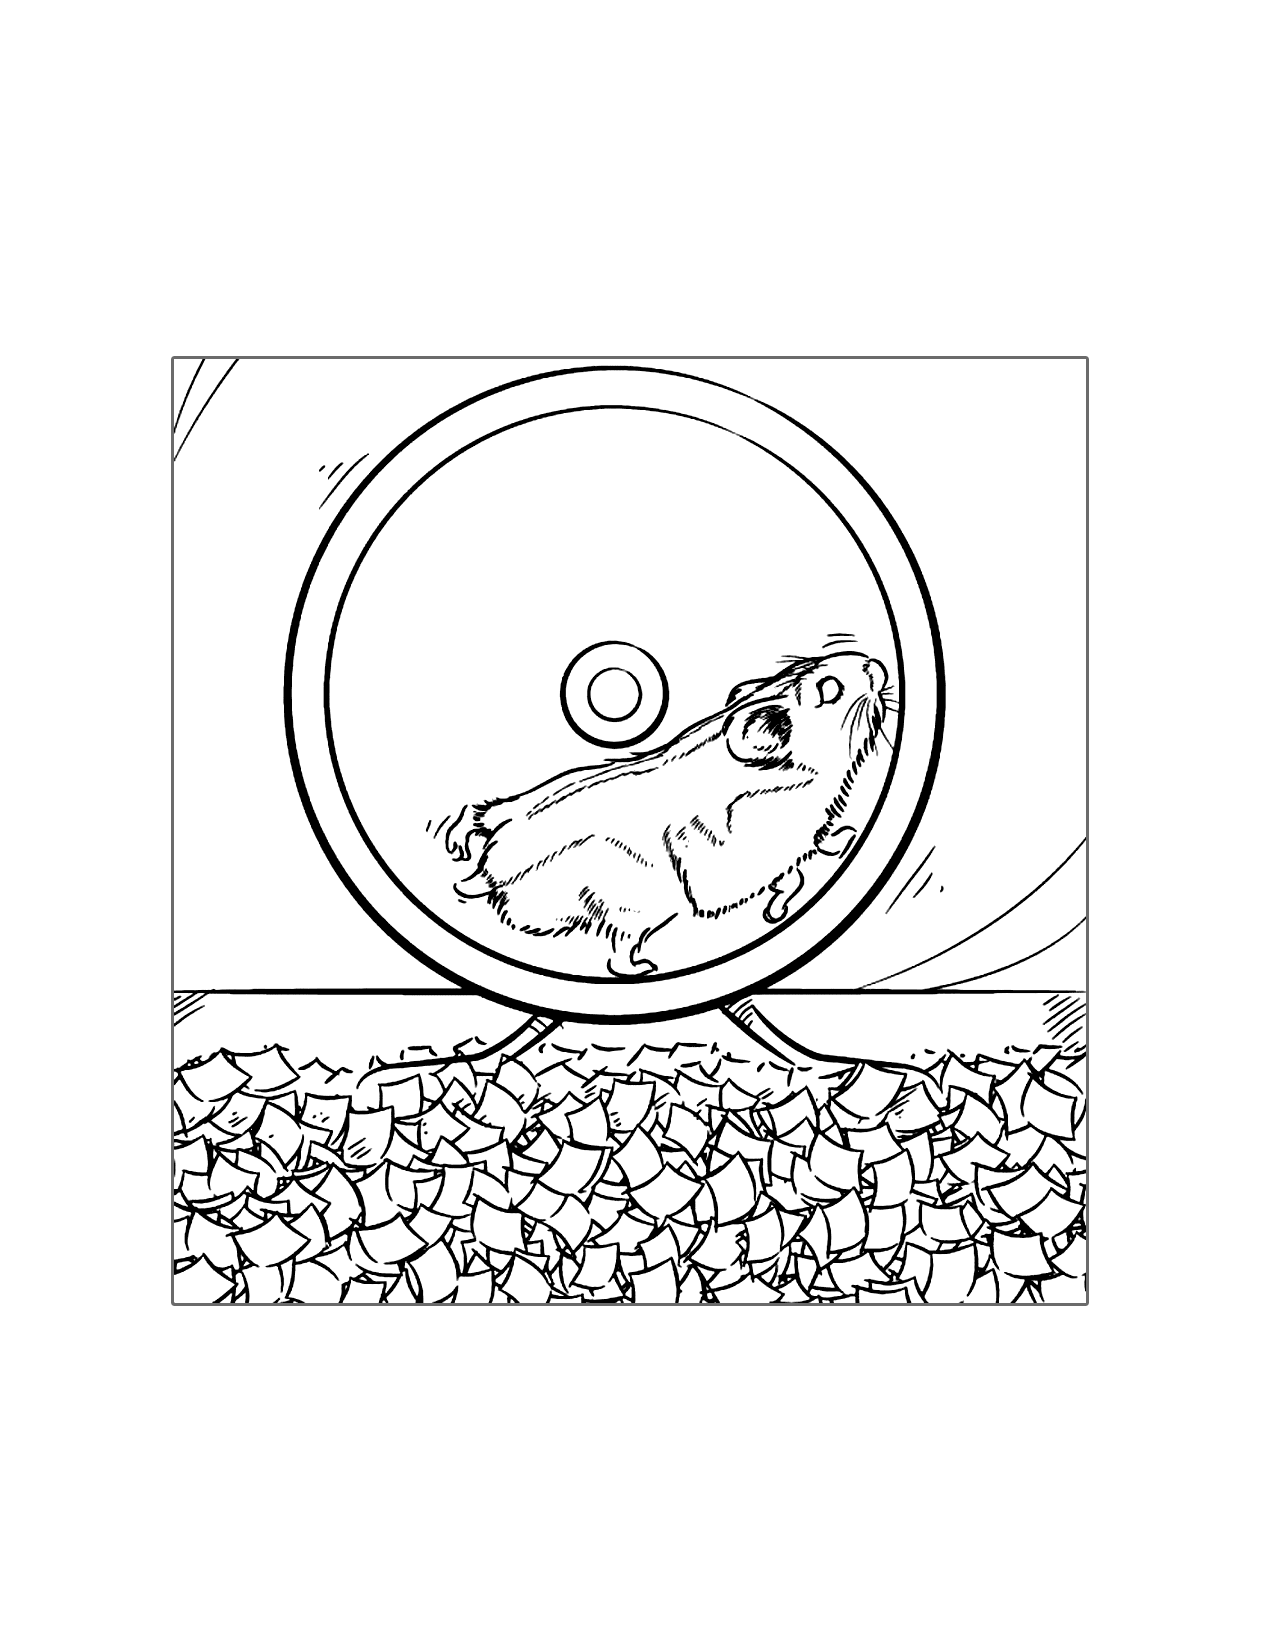 Hamster Running On Wheel Coloring Page